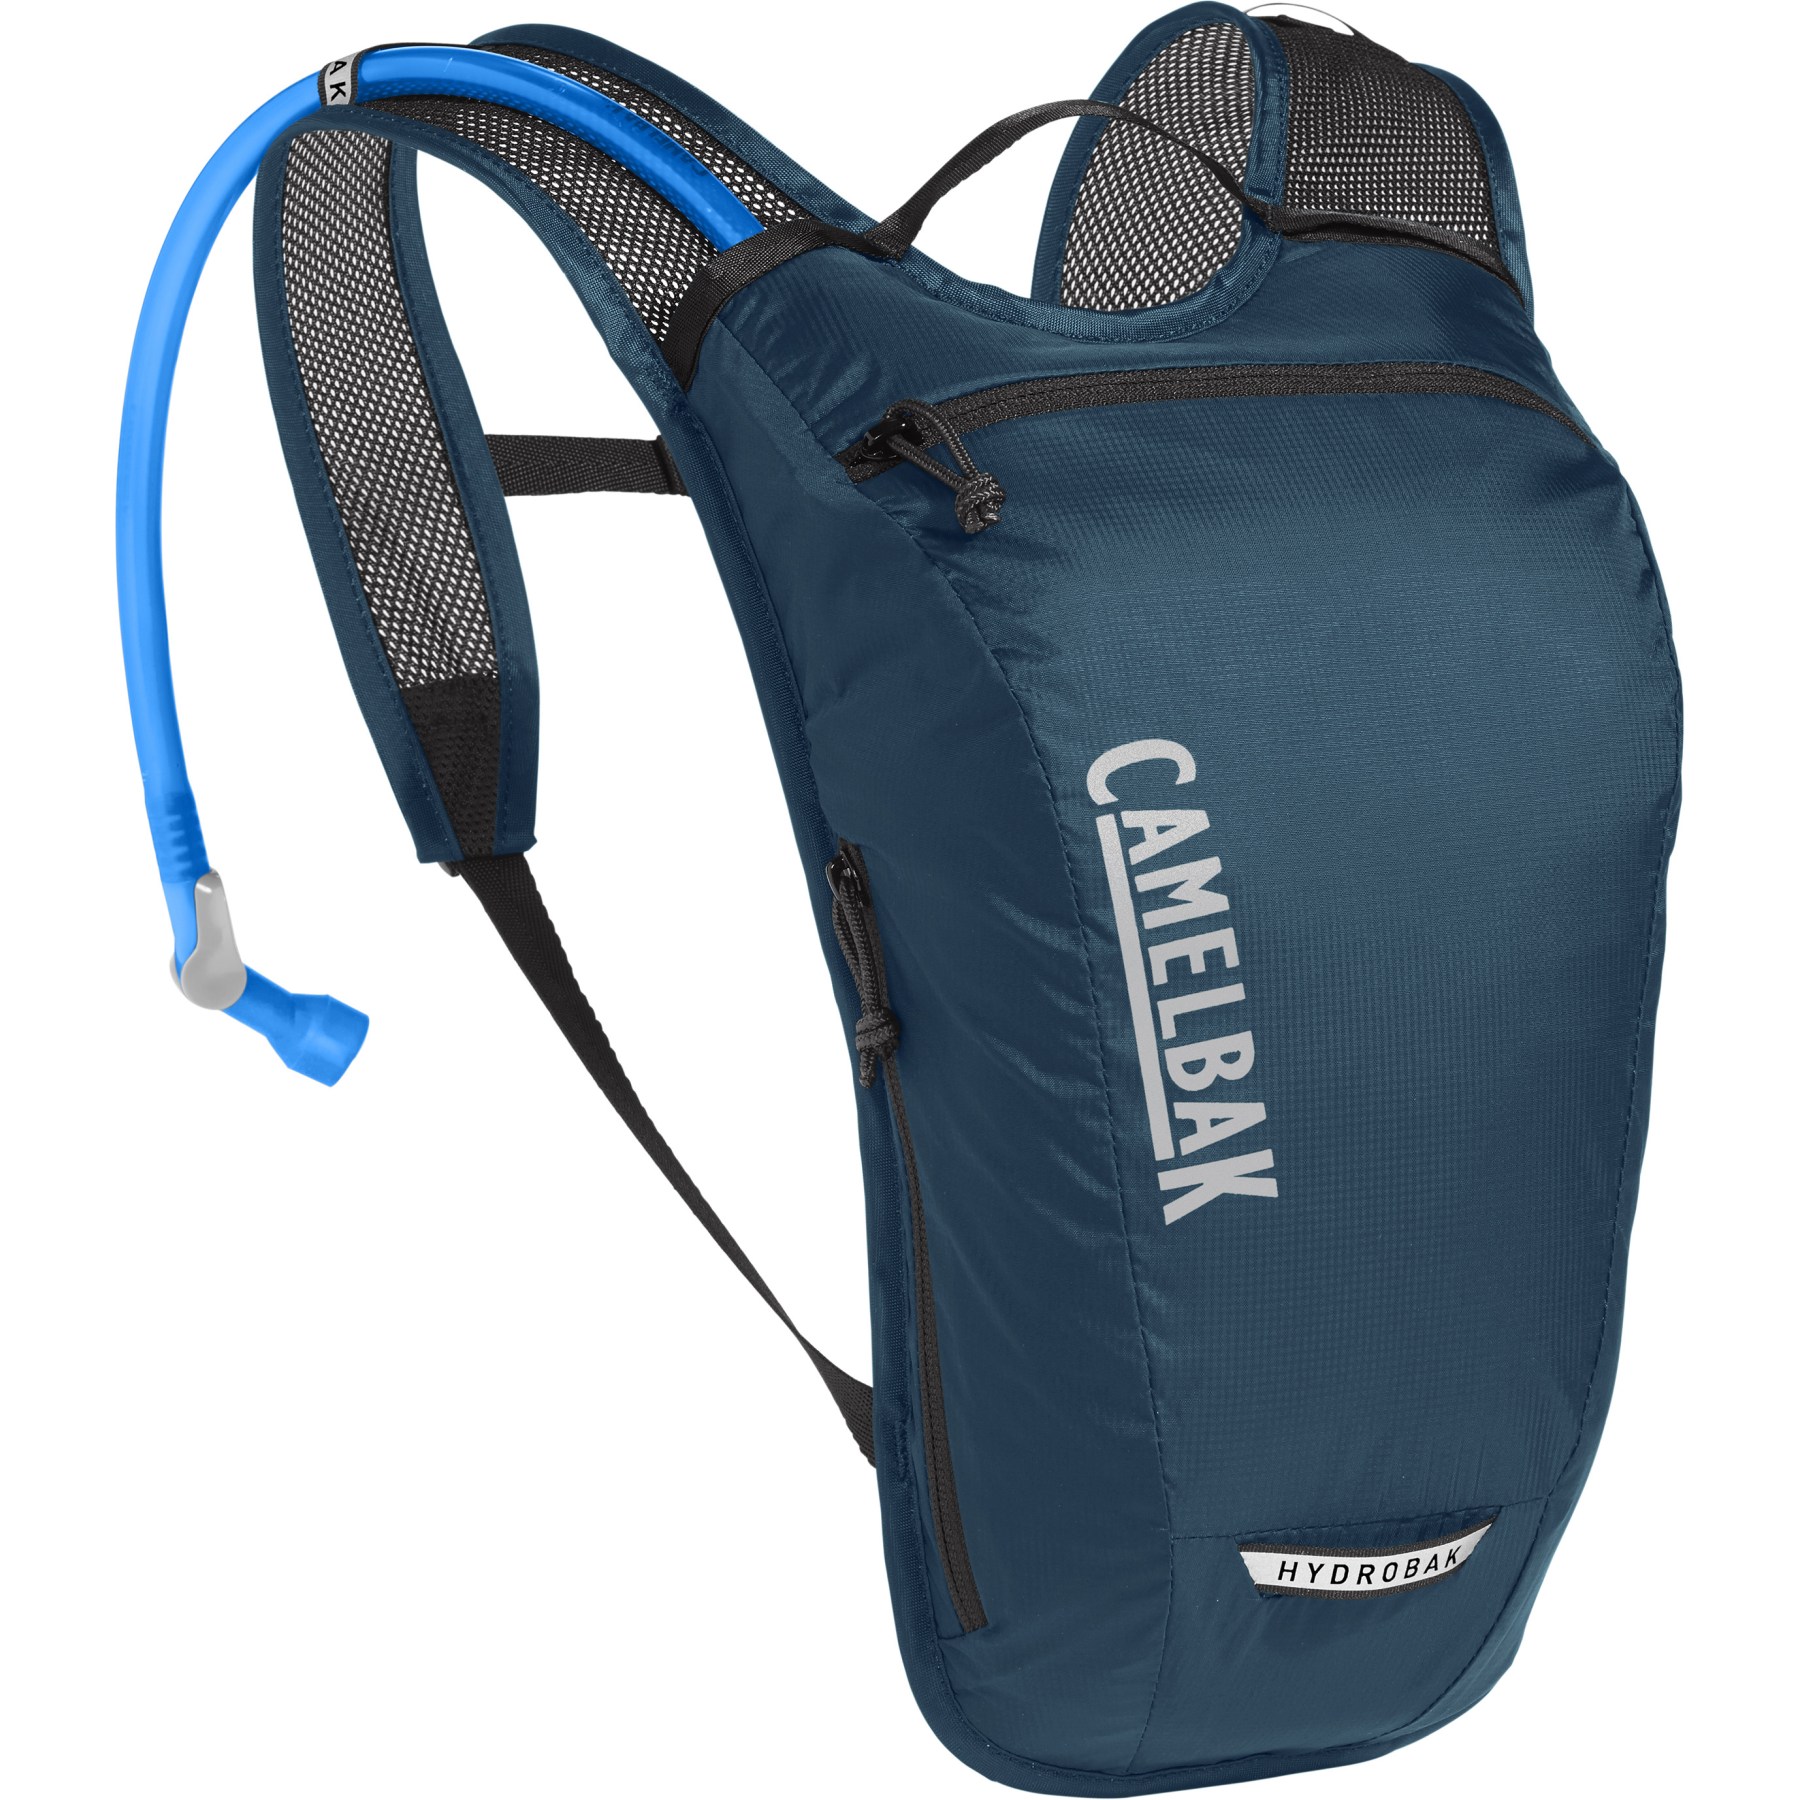 Picture of CamelBak Hydrobak Light Backpack with Hydration System 1.5L - gibraltar navy/black